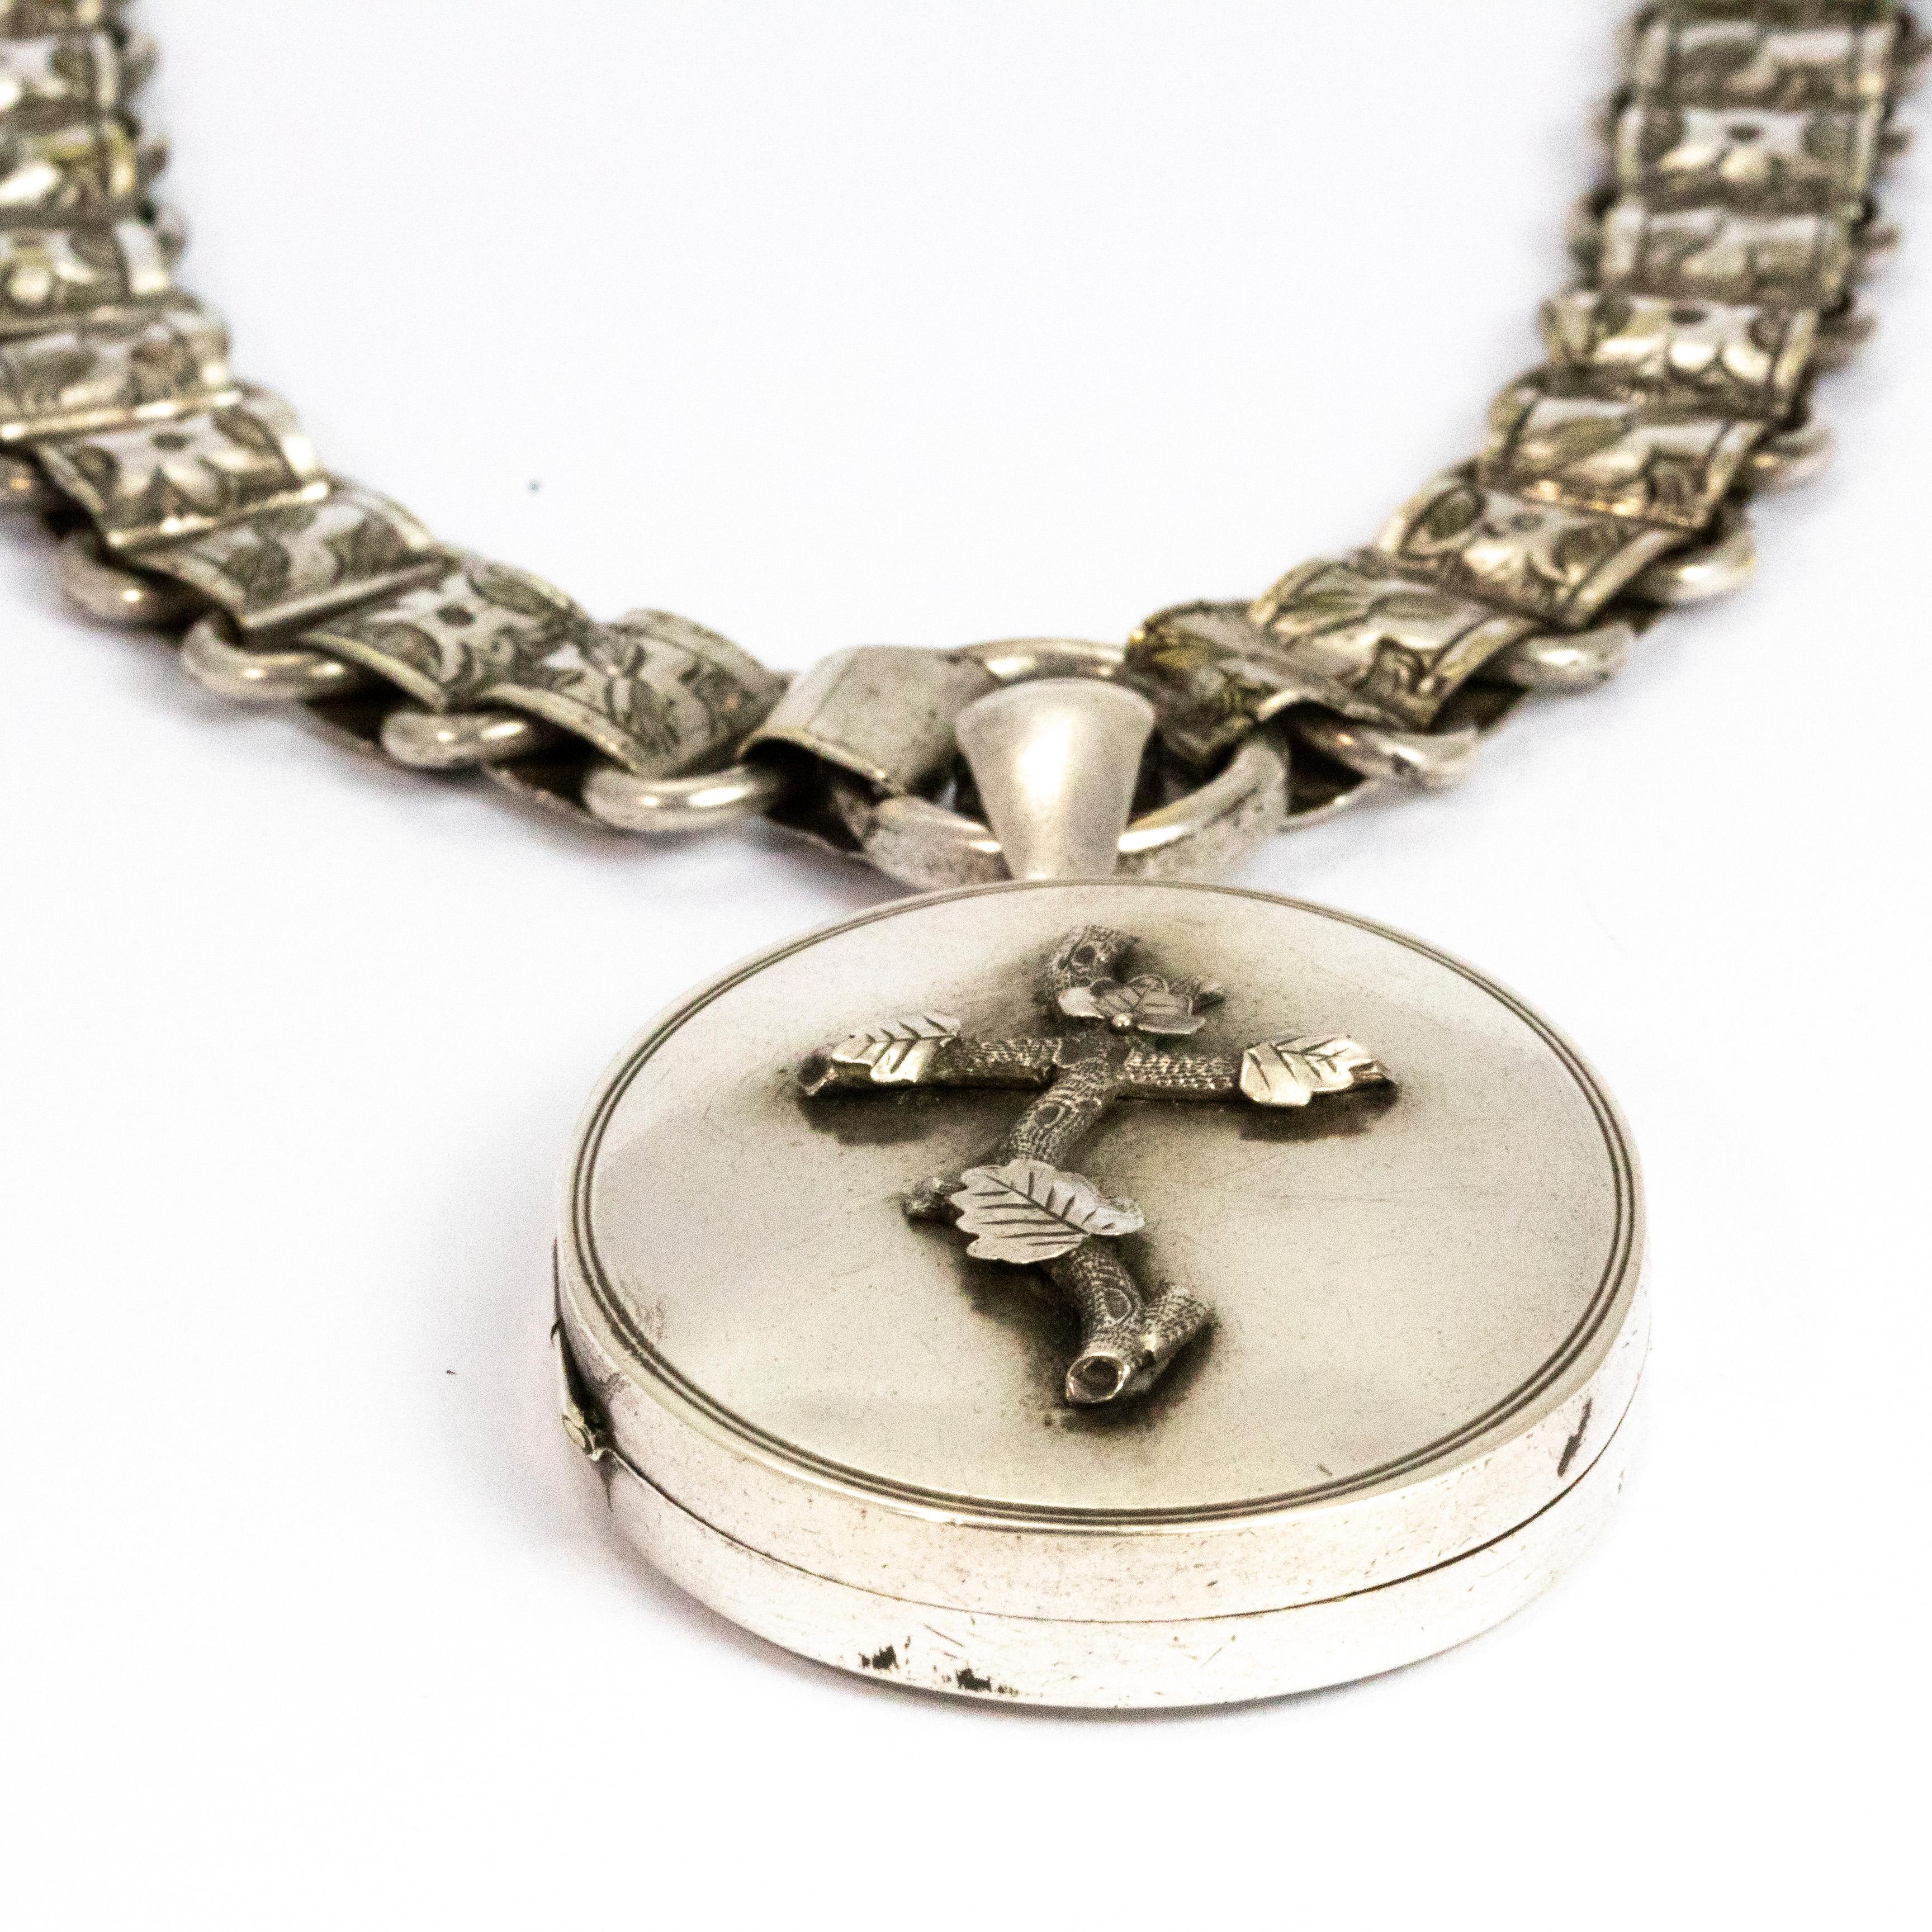 I love a chunky silver locket on a decorative collar. This particular locket features a cross modelled out of branches and is decorates with leaves. Each link on this collar is very shallow which make the collar sit beautifully flat and has